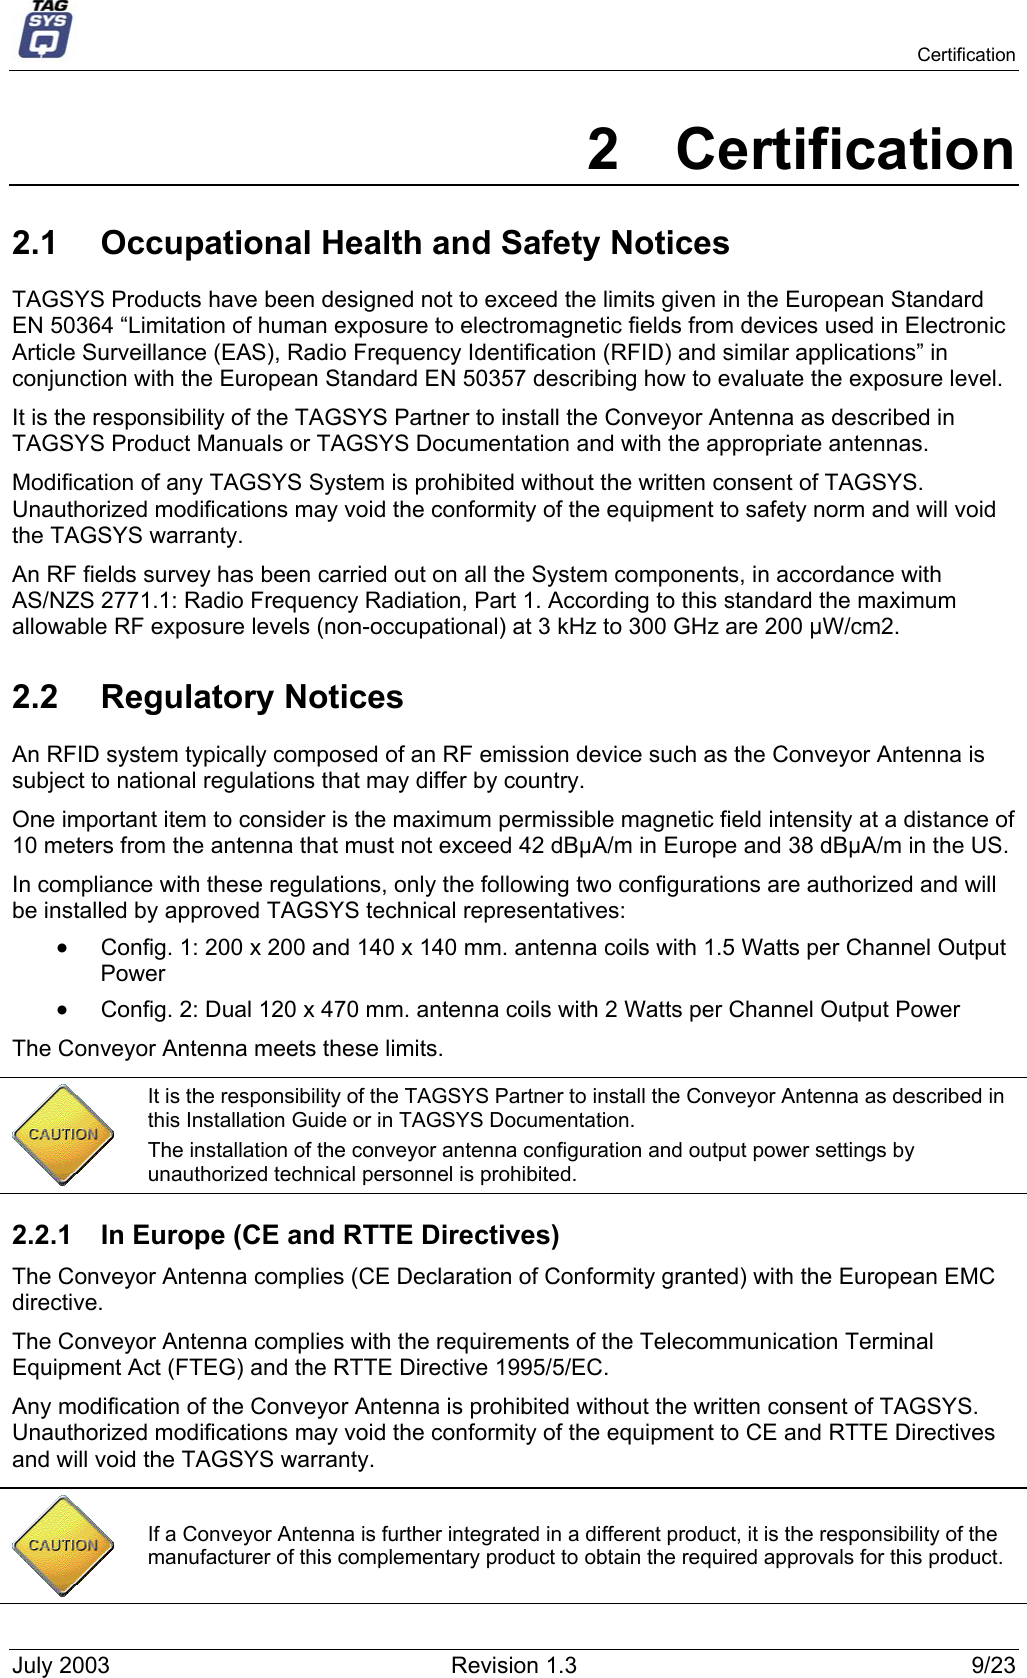   Certification 2 Certification 2.1  Occupational Health and Safety Notices TAGSYS Products have been designed not to exceed the limits given in the European Standard EN 50364 “Limitation of human exposure to electromagnetic fields from devices used in Electronic Article Surveillance (EAS), Radio Frequency Identification (RFID) and similar applications” in conjunction with the European Standard EN 50357 describing how to evaluate the exposure level. It is the responsibility of the TAGSYS Partner to install the Conveyor Antenna as described in TAGSYS Product Manuals or TAGSYS Documentation and with the appropriate antennas.  Modification of any TAGSYS System is prohibited without the written consent of TAGSYS. Unauthorized modifications may void the conformity of the equipment to safety norm and will void the TAGSYS warranty. An RF fields survey has been carried out on all the System components, in accordance with AS/NZS 2771.1: Radio Frequency Radiation, Part 1. According to this standard the maximum allowable RF exposure levels (non-occupational) at 3 kHz to 300 GHz are 200 µW/cm2.  2.2 Regulatory Notices An RFID system typically composed of an RF emission device such as the Conveyor Antenna is subject to national regulations that may differ by country. One important item to consider is the maximum permissible magnetic field intensity at a distance of 10 meters from the antenna that must not exceed 42 dBµA/m in Europe and 38 dBµA/m in the US. In compliance with these regulations, only the following two configurations are authorized and will be installed by approved TAGSYS technical representatives: •  Config. 1: 200 x 200 and 140 x 140 mm. antenna coils with 1.5 Watts per Channel Output Power  •  Config. 2: Dual 120 x 470 mm. antenna coils with 2 Watts per Channel Output Power The Conveyor Antenna meets these limits.  It is the responsibility of the TAGSYS Partner to install the Conveyor Antenna as described in this Installation Guide or in TAGSYS Documentation. The installation of the conveyor antenna configuration and output power settings by unauthorized technical personnel is prohibited. 2.2.1  In Europe (CE and RTTE Directives)  The Conveyor Antenna complies (CE Declaration of Conformity granted) with the European EMC directive. The Conveyor Antenna complies with the requirements of the Telecommunication Terminal Equipment Act (FTEG) and the RTTE Directive 1995/5/EC. Any modification of the Conveyor Antenna is prohibited without the written consent of TAGSYS. Unauthorized modifications may void the conformity of the equipment to CE and RTTE Directives and will void the TAGSYS warranty.   If a Conveyor Antenna is further integrated in a different product, it is the responsibility of the manufacturer of this complementary product to obtain the required approvals for this product. July 2003  Revision 1.3  9/23 